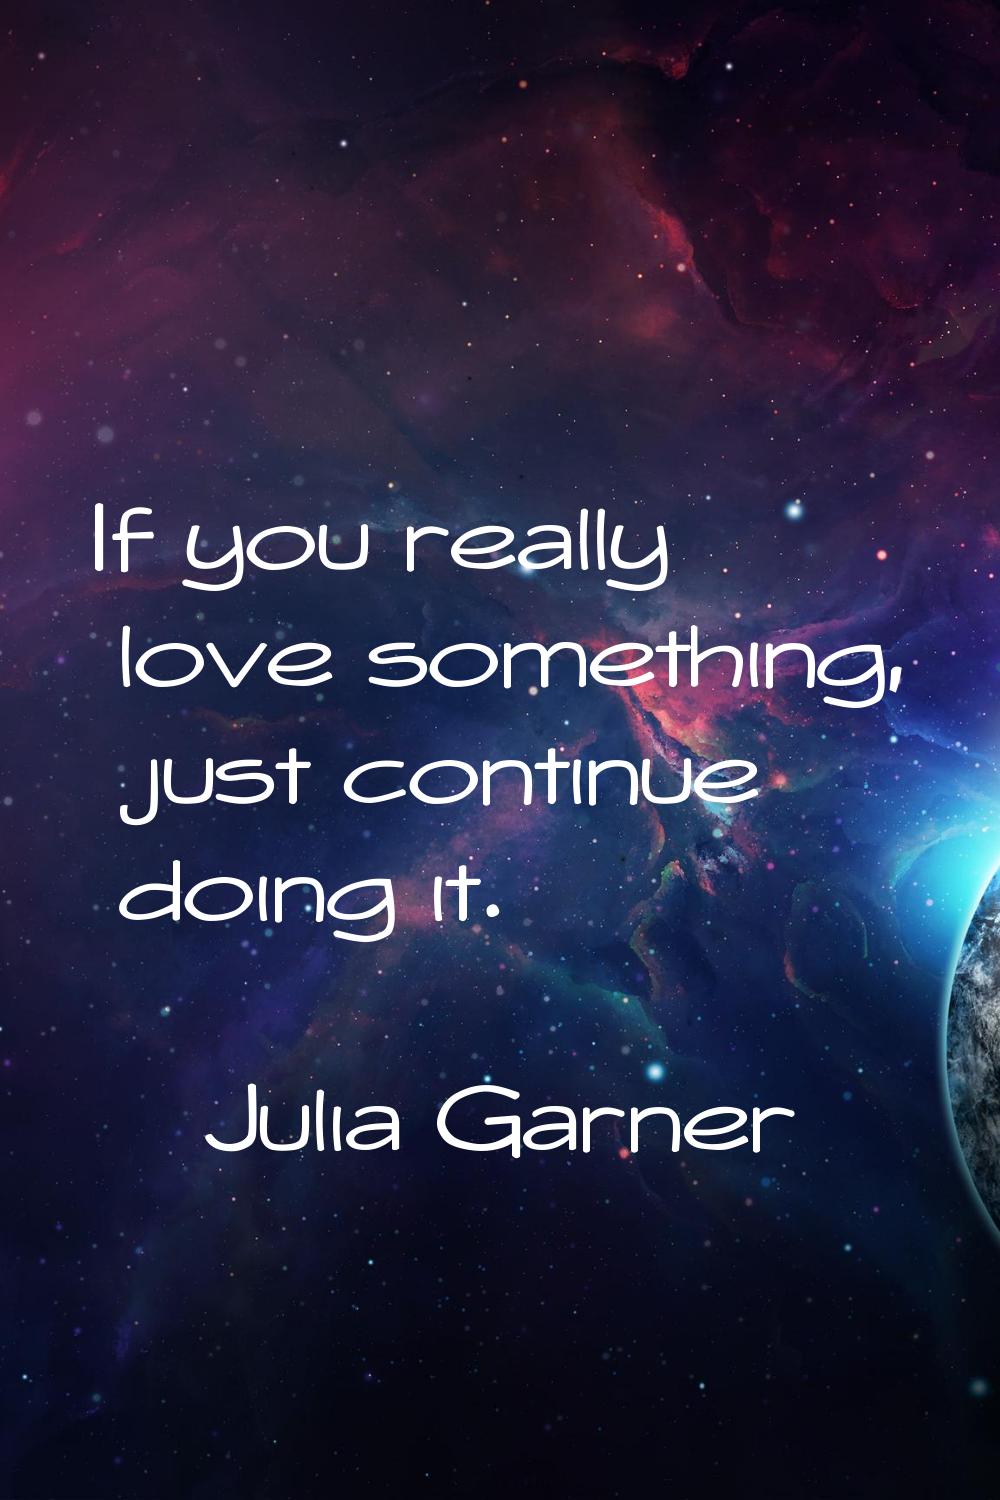 If you really love something, just continue doing it.